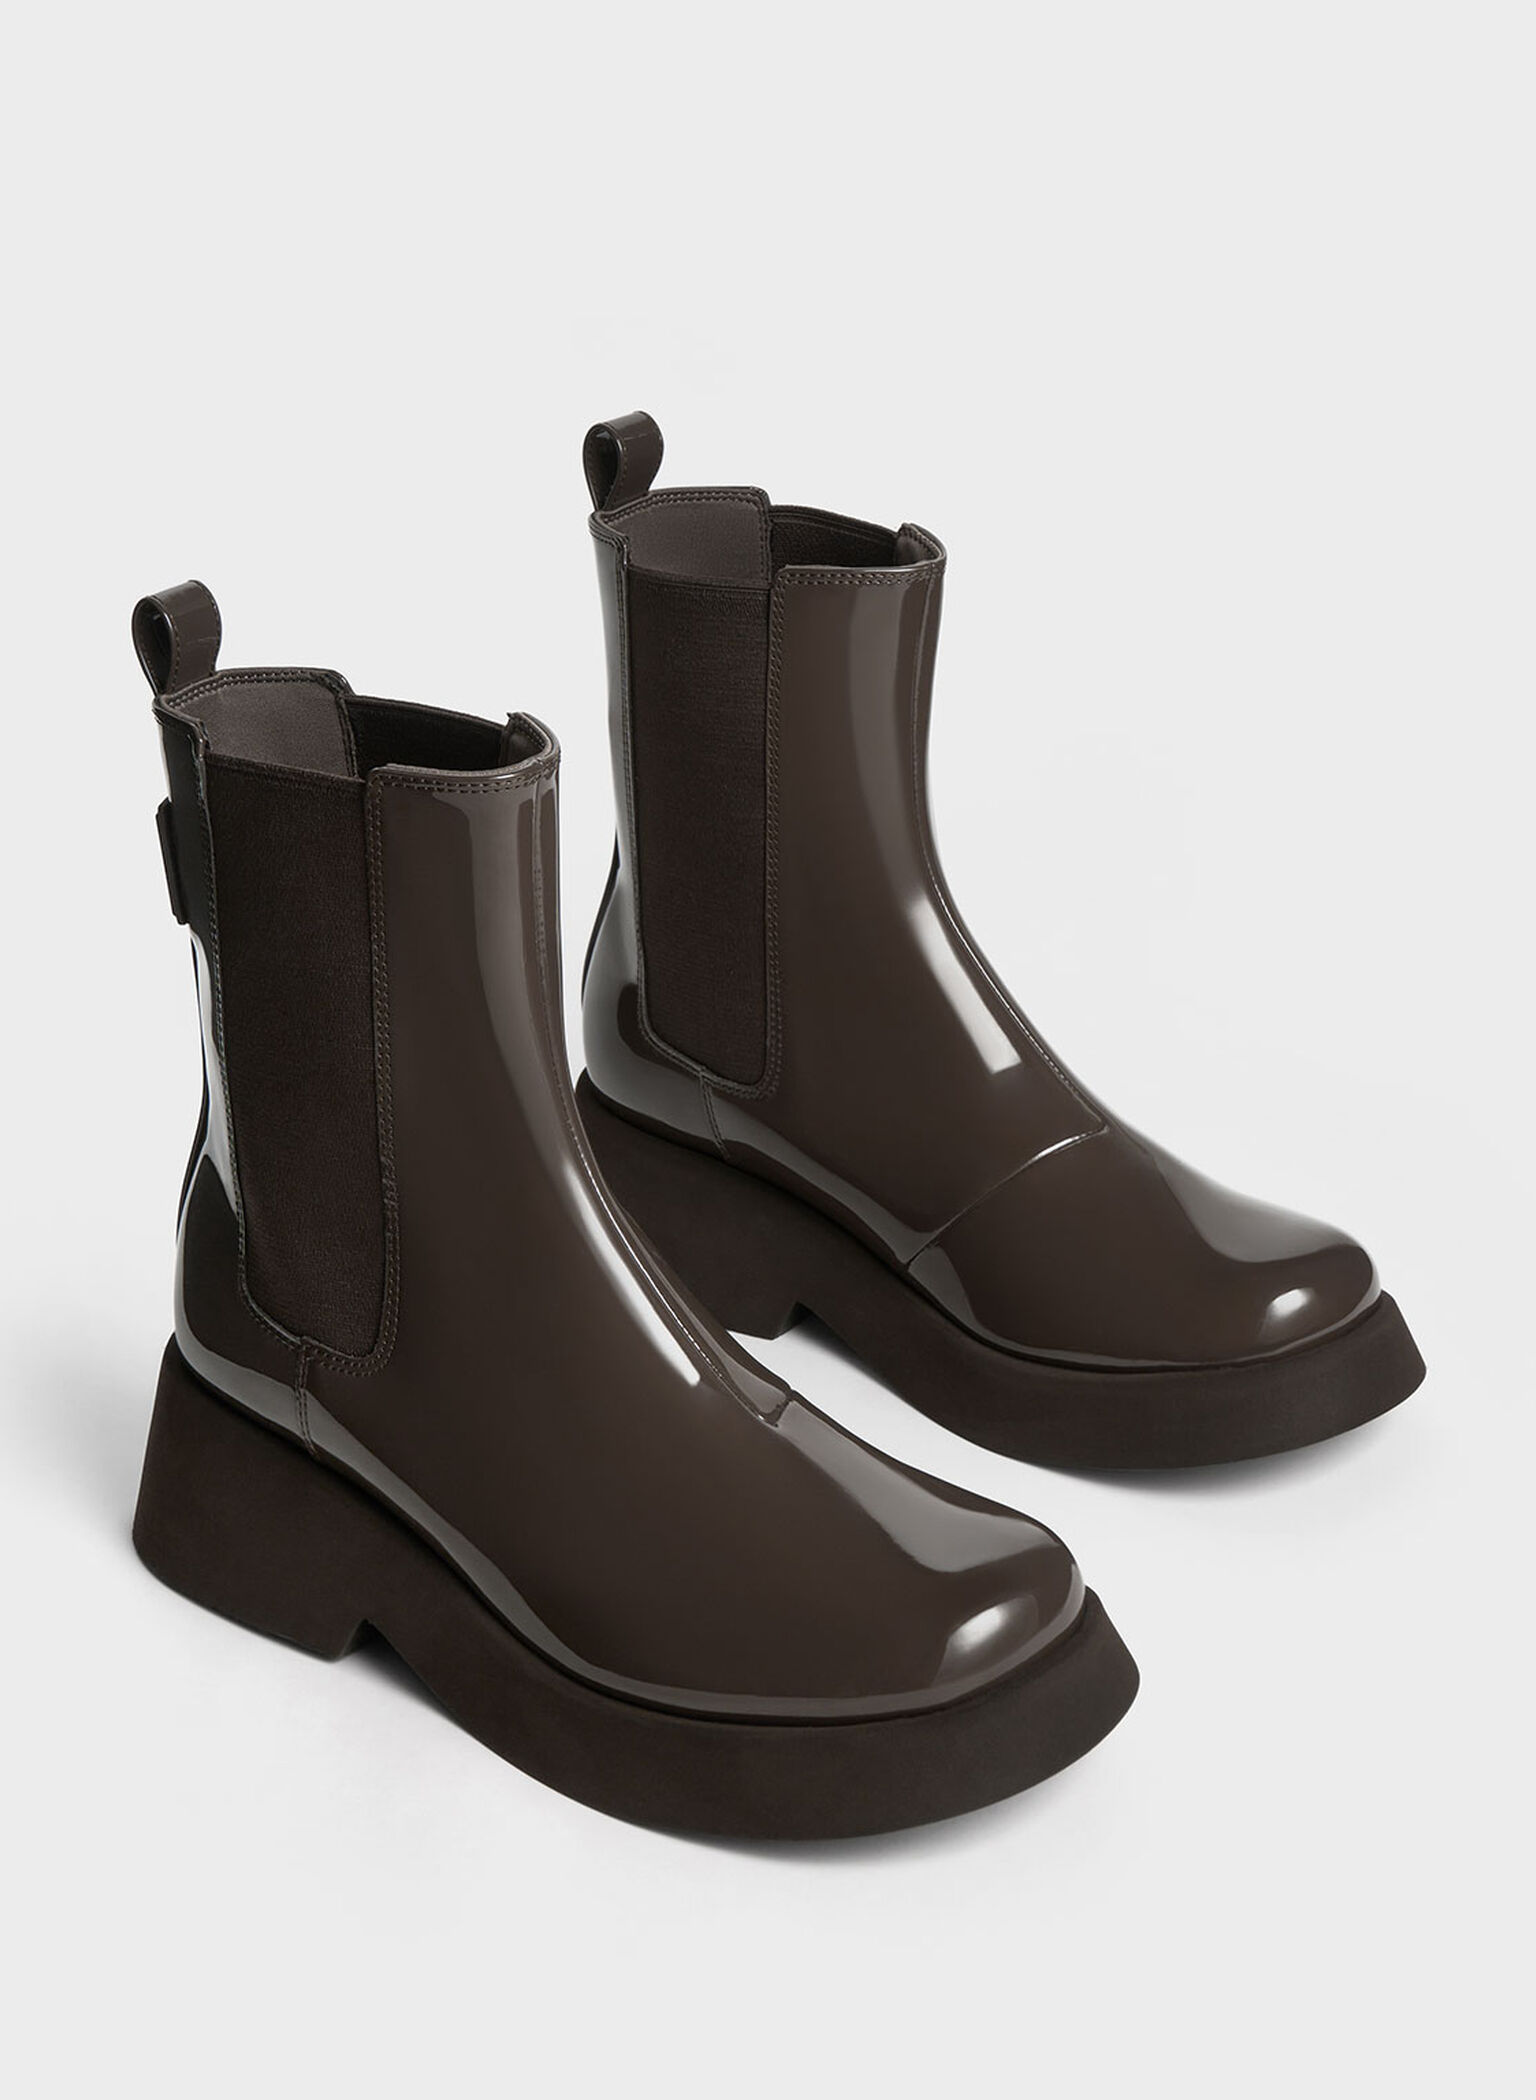 Giselle Patent Chelsea Boots, Brown, hi-res